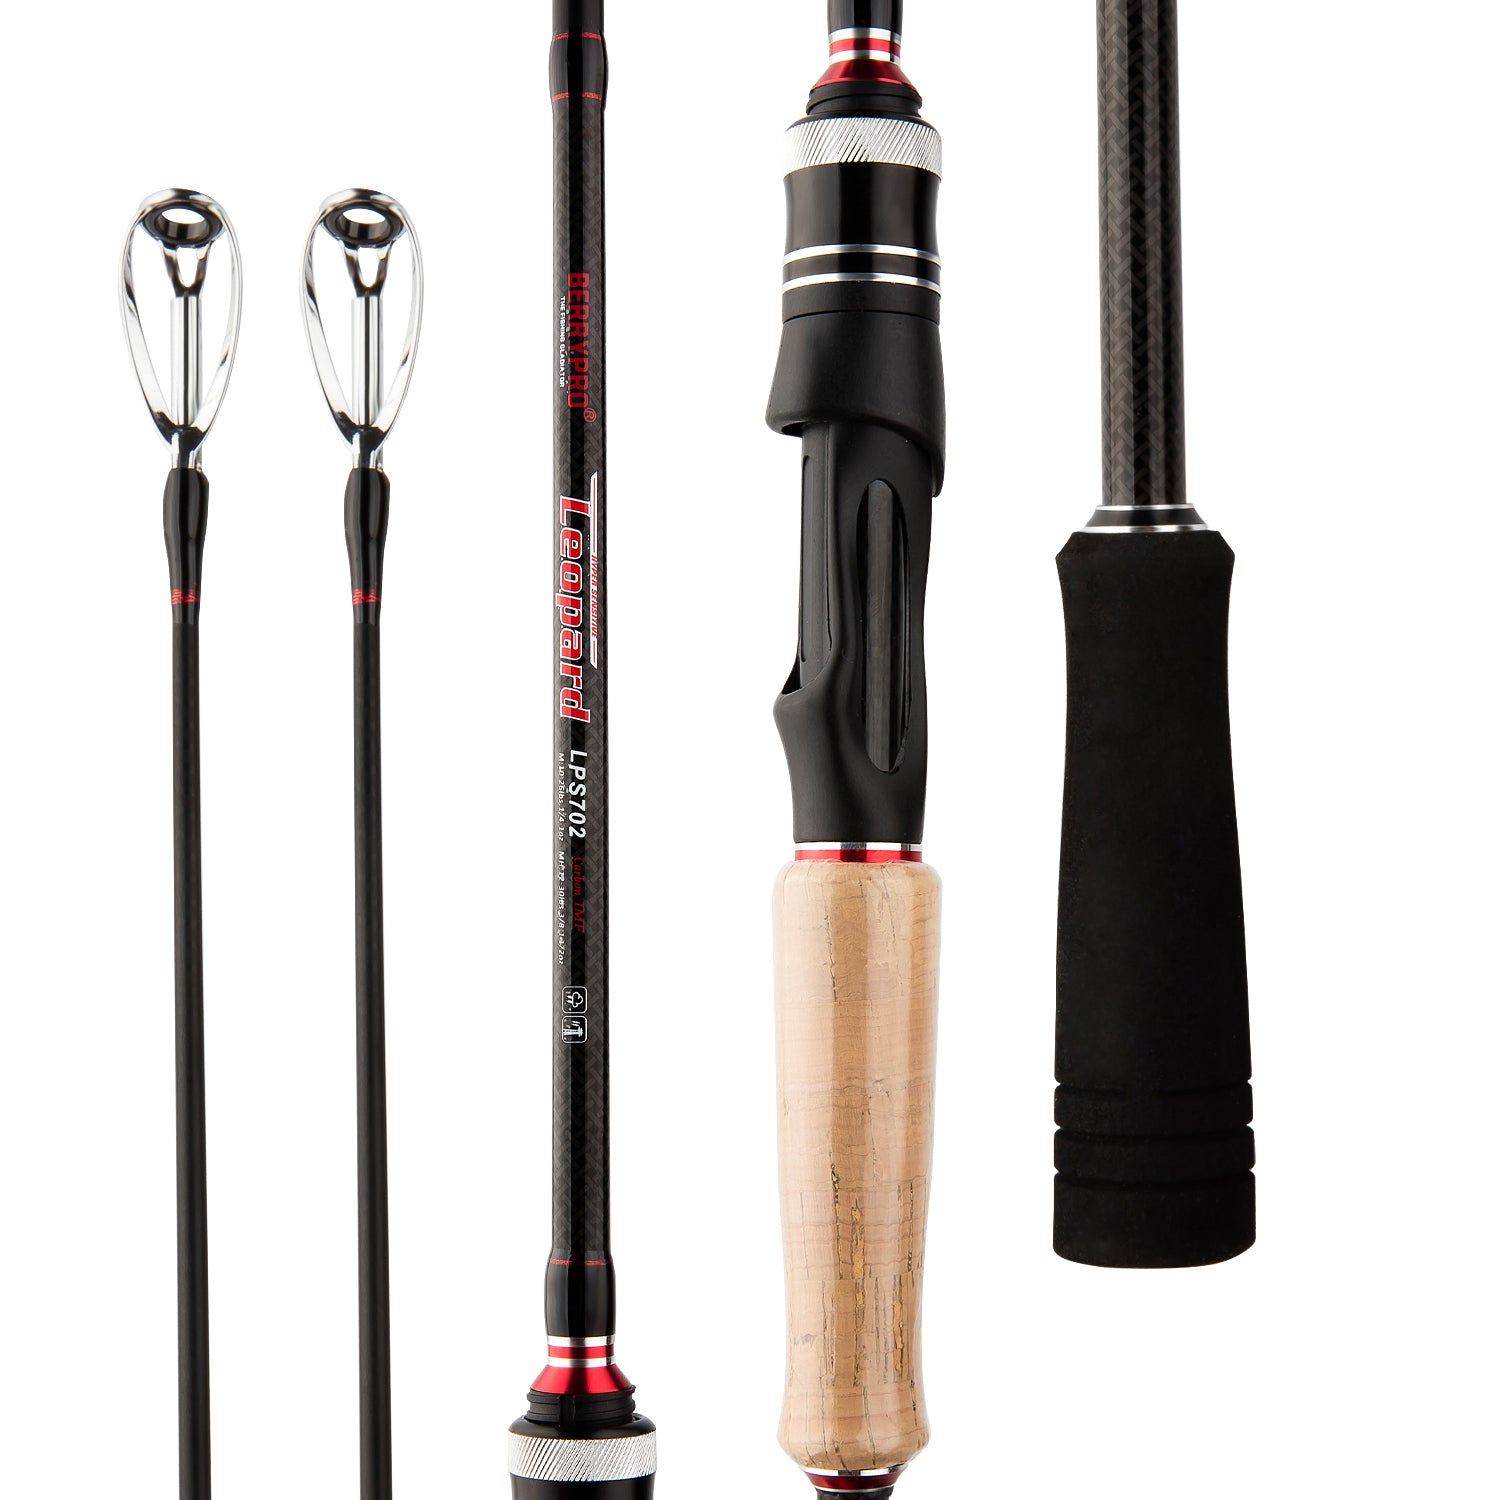 BERRYPRO Baitcasting Fishing Rods and Spinning rods (Twin-tip- 7